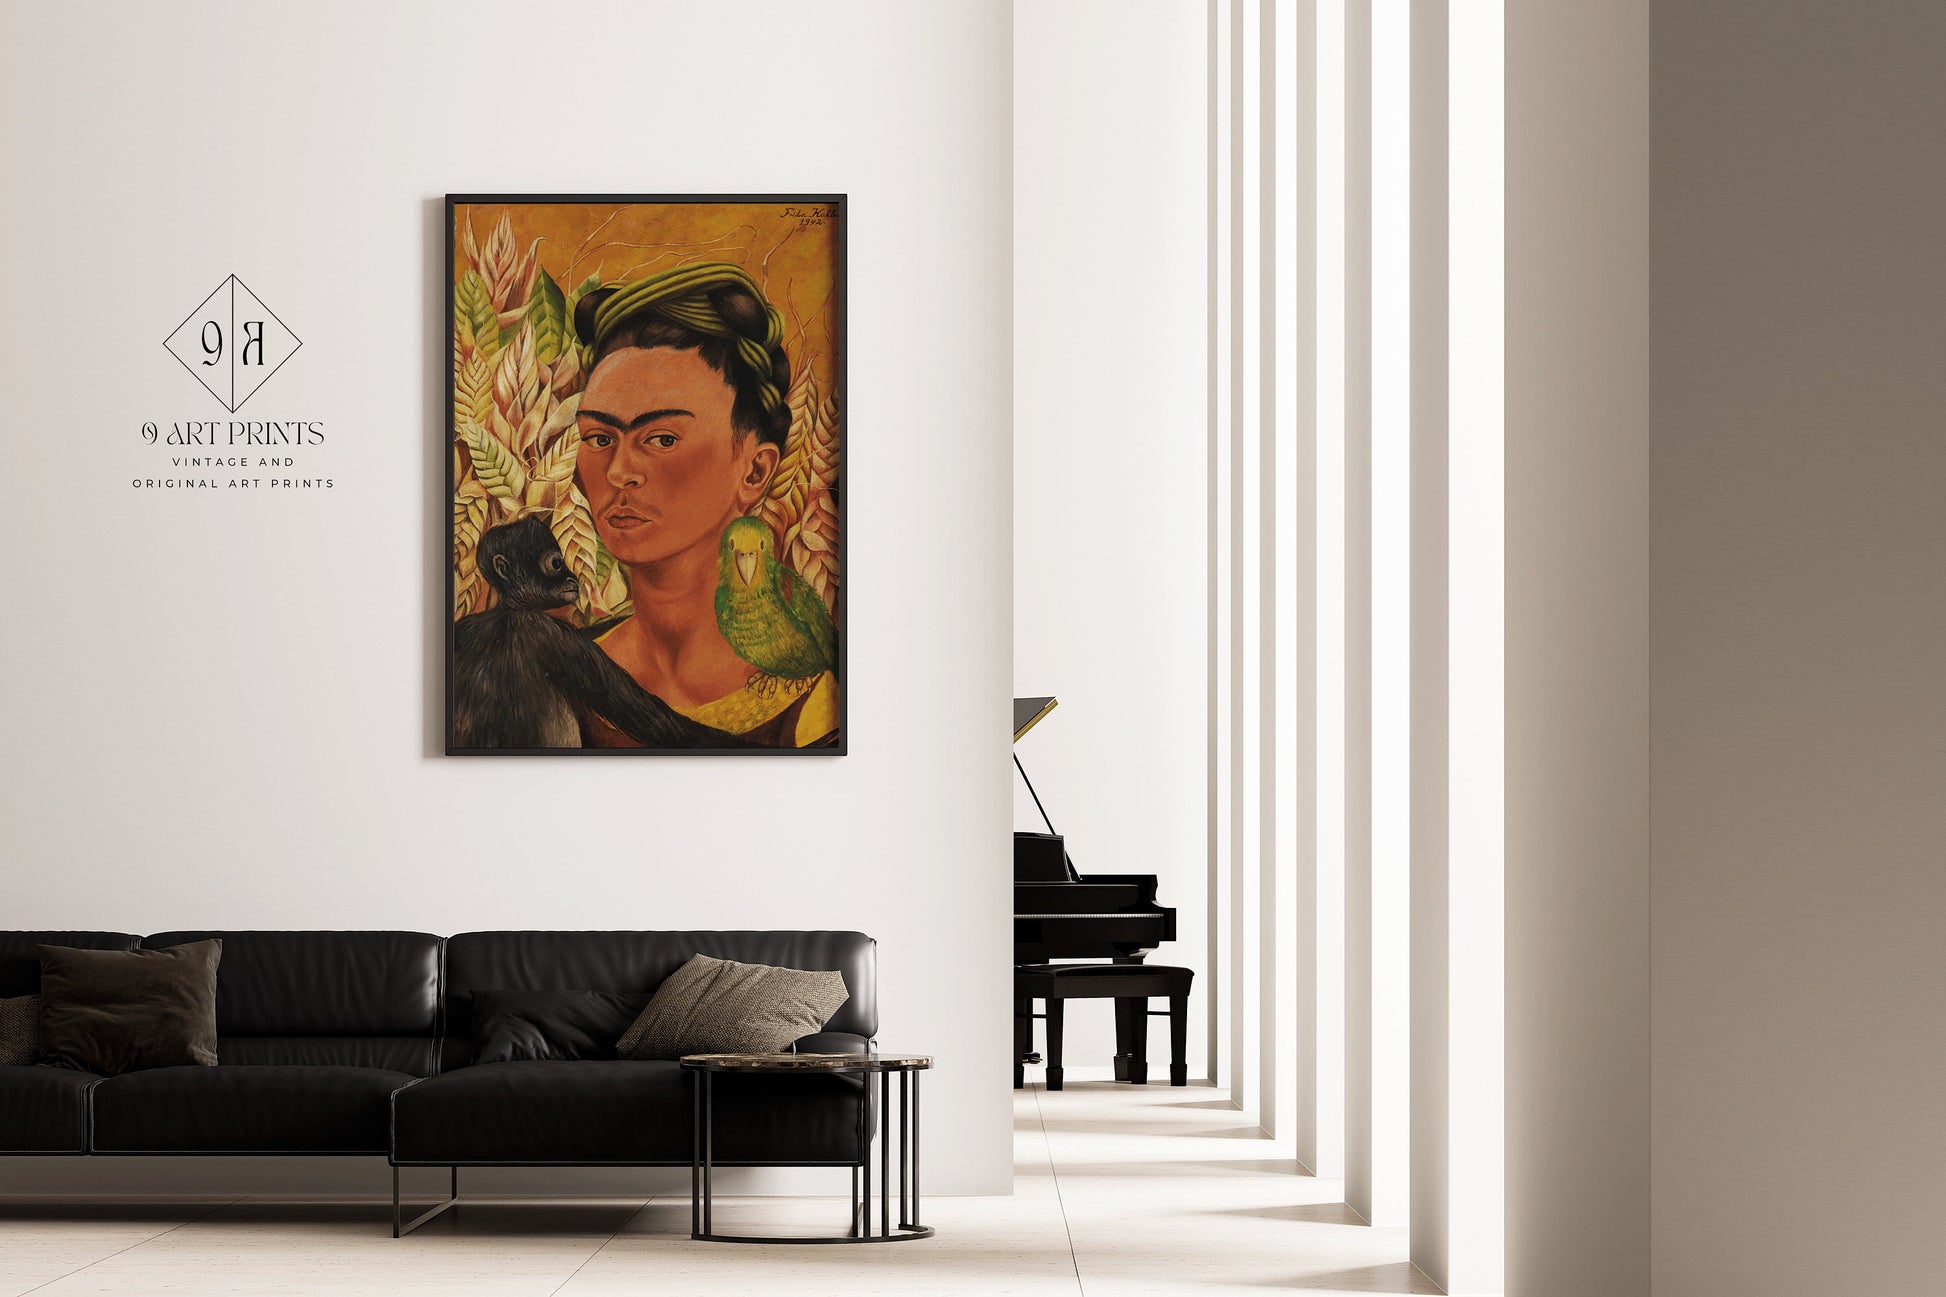 Frida Kahlo Self Portrait with Monkey Art Print Exhibition Poster Portrait Modern Gallery Framed Ready to Hang Home Office Decor Gift Idea